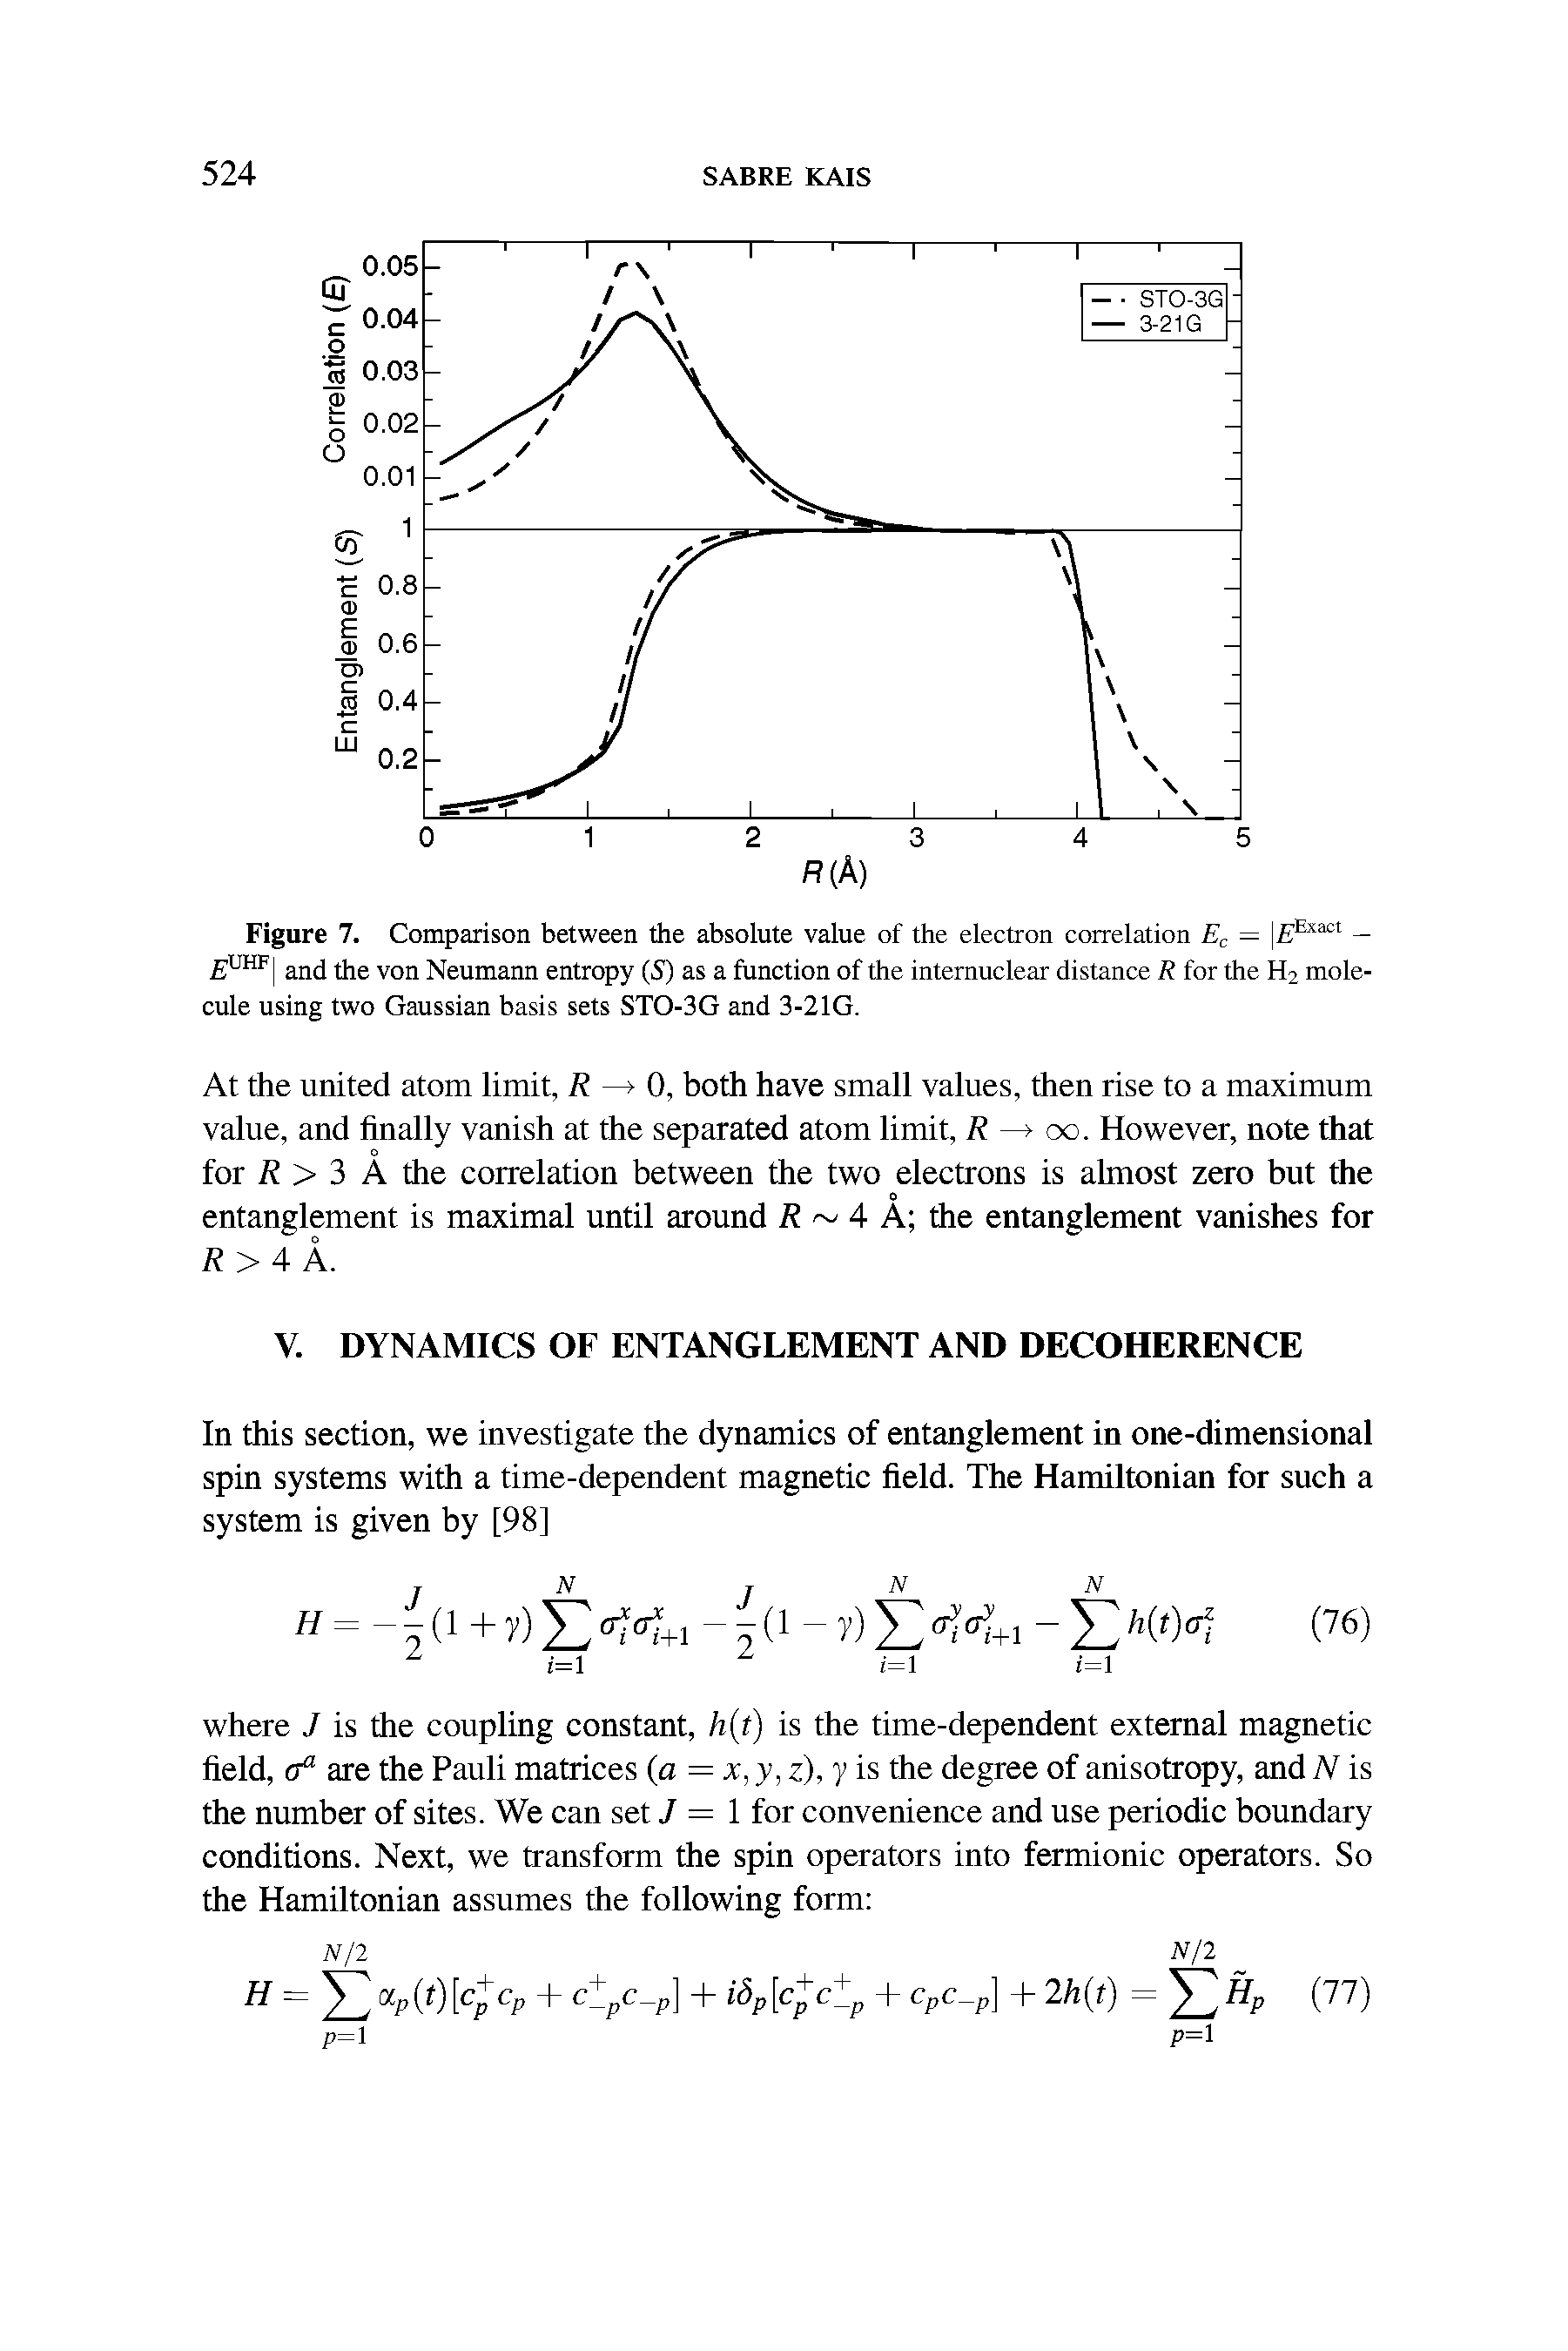 Figure 7. Comparison between the absolute value of the electron correlation = Exact and the von Neumann entropy (S) as a function of the internuclear distance R for the H2 molecule using two Gaussian basis sets STO-3G and 3-21G.